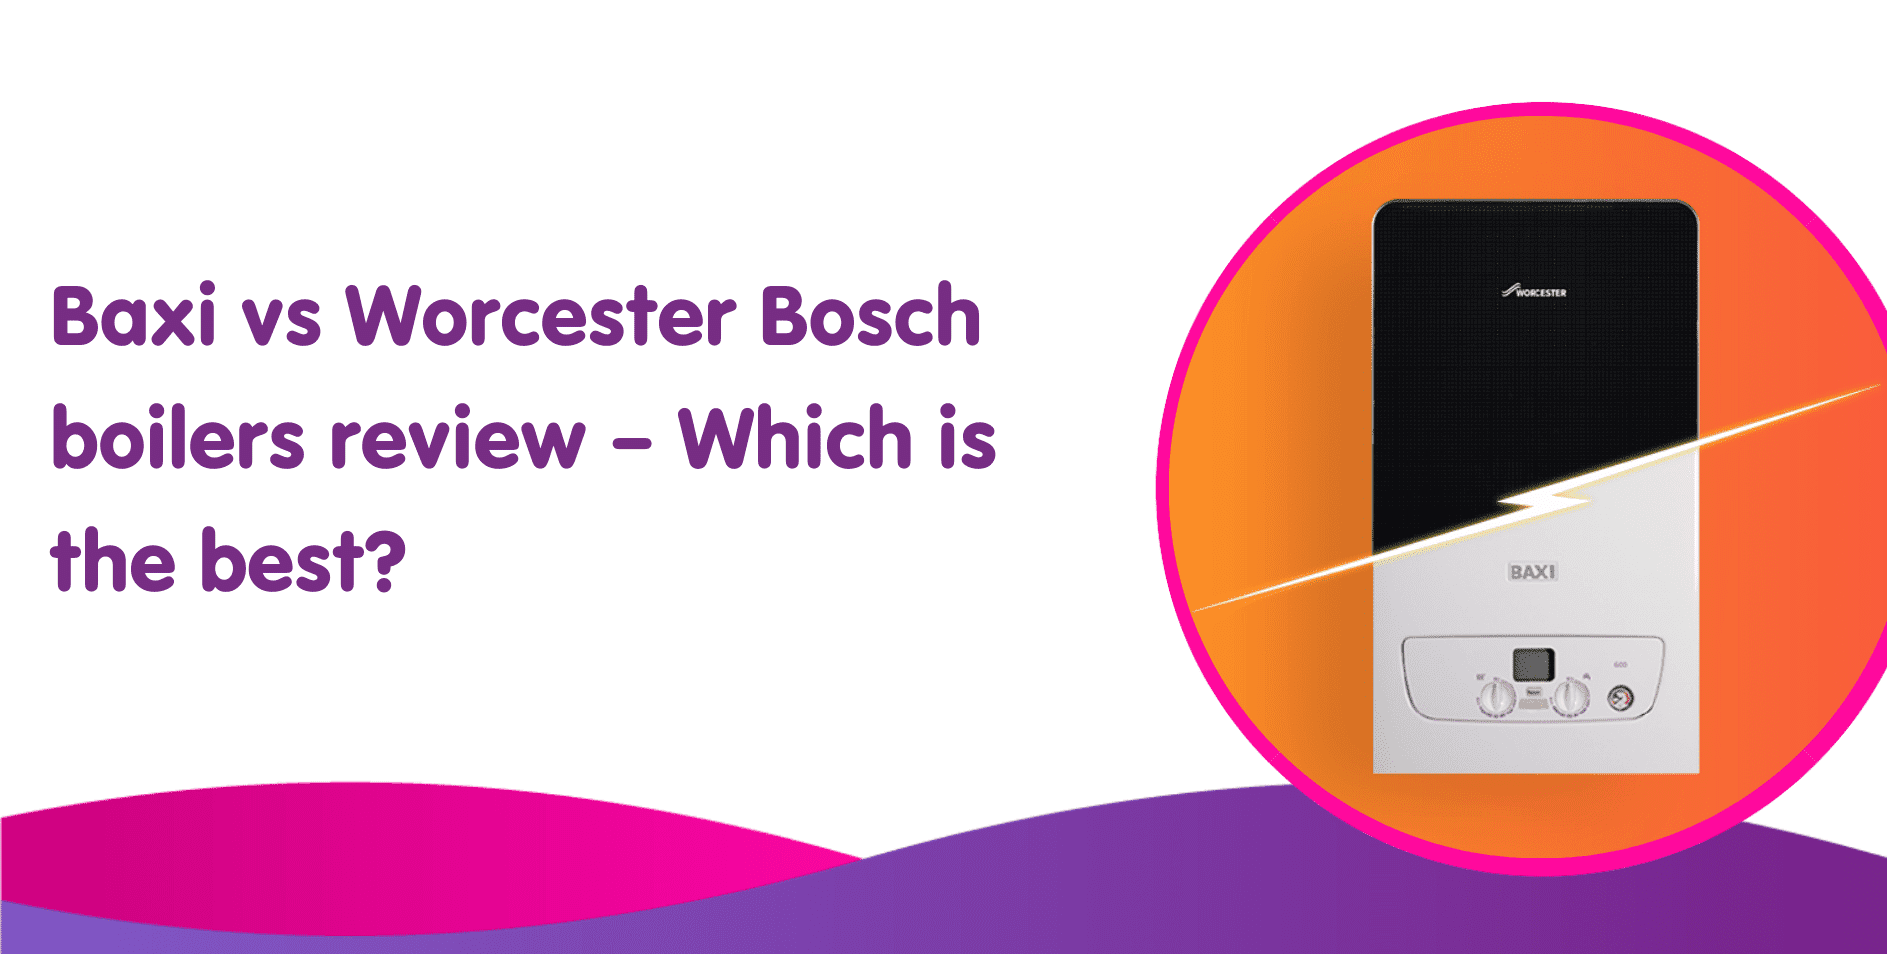 Baxi vs Worcester Bosch boilers review – Which is the best?